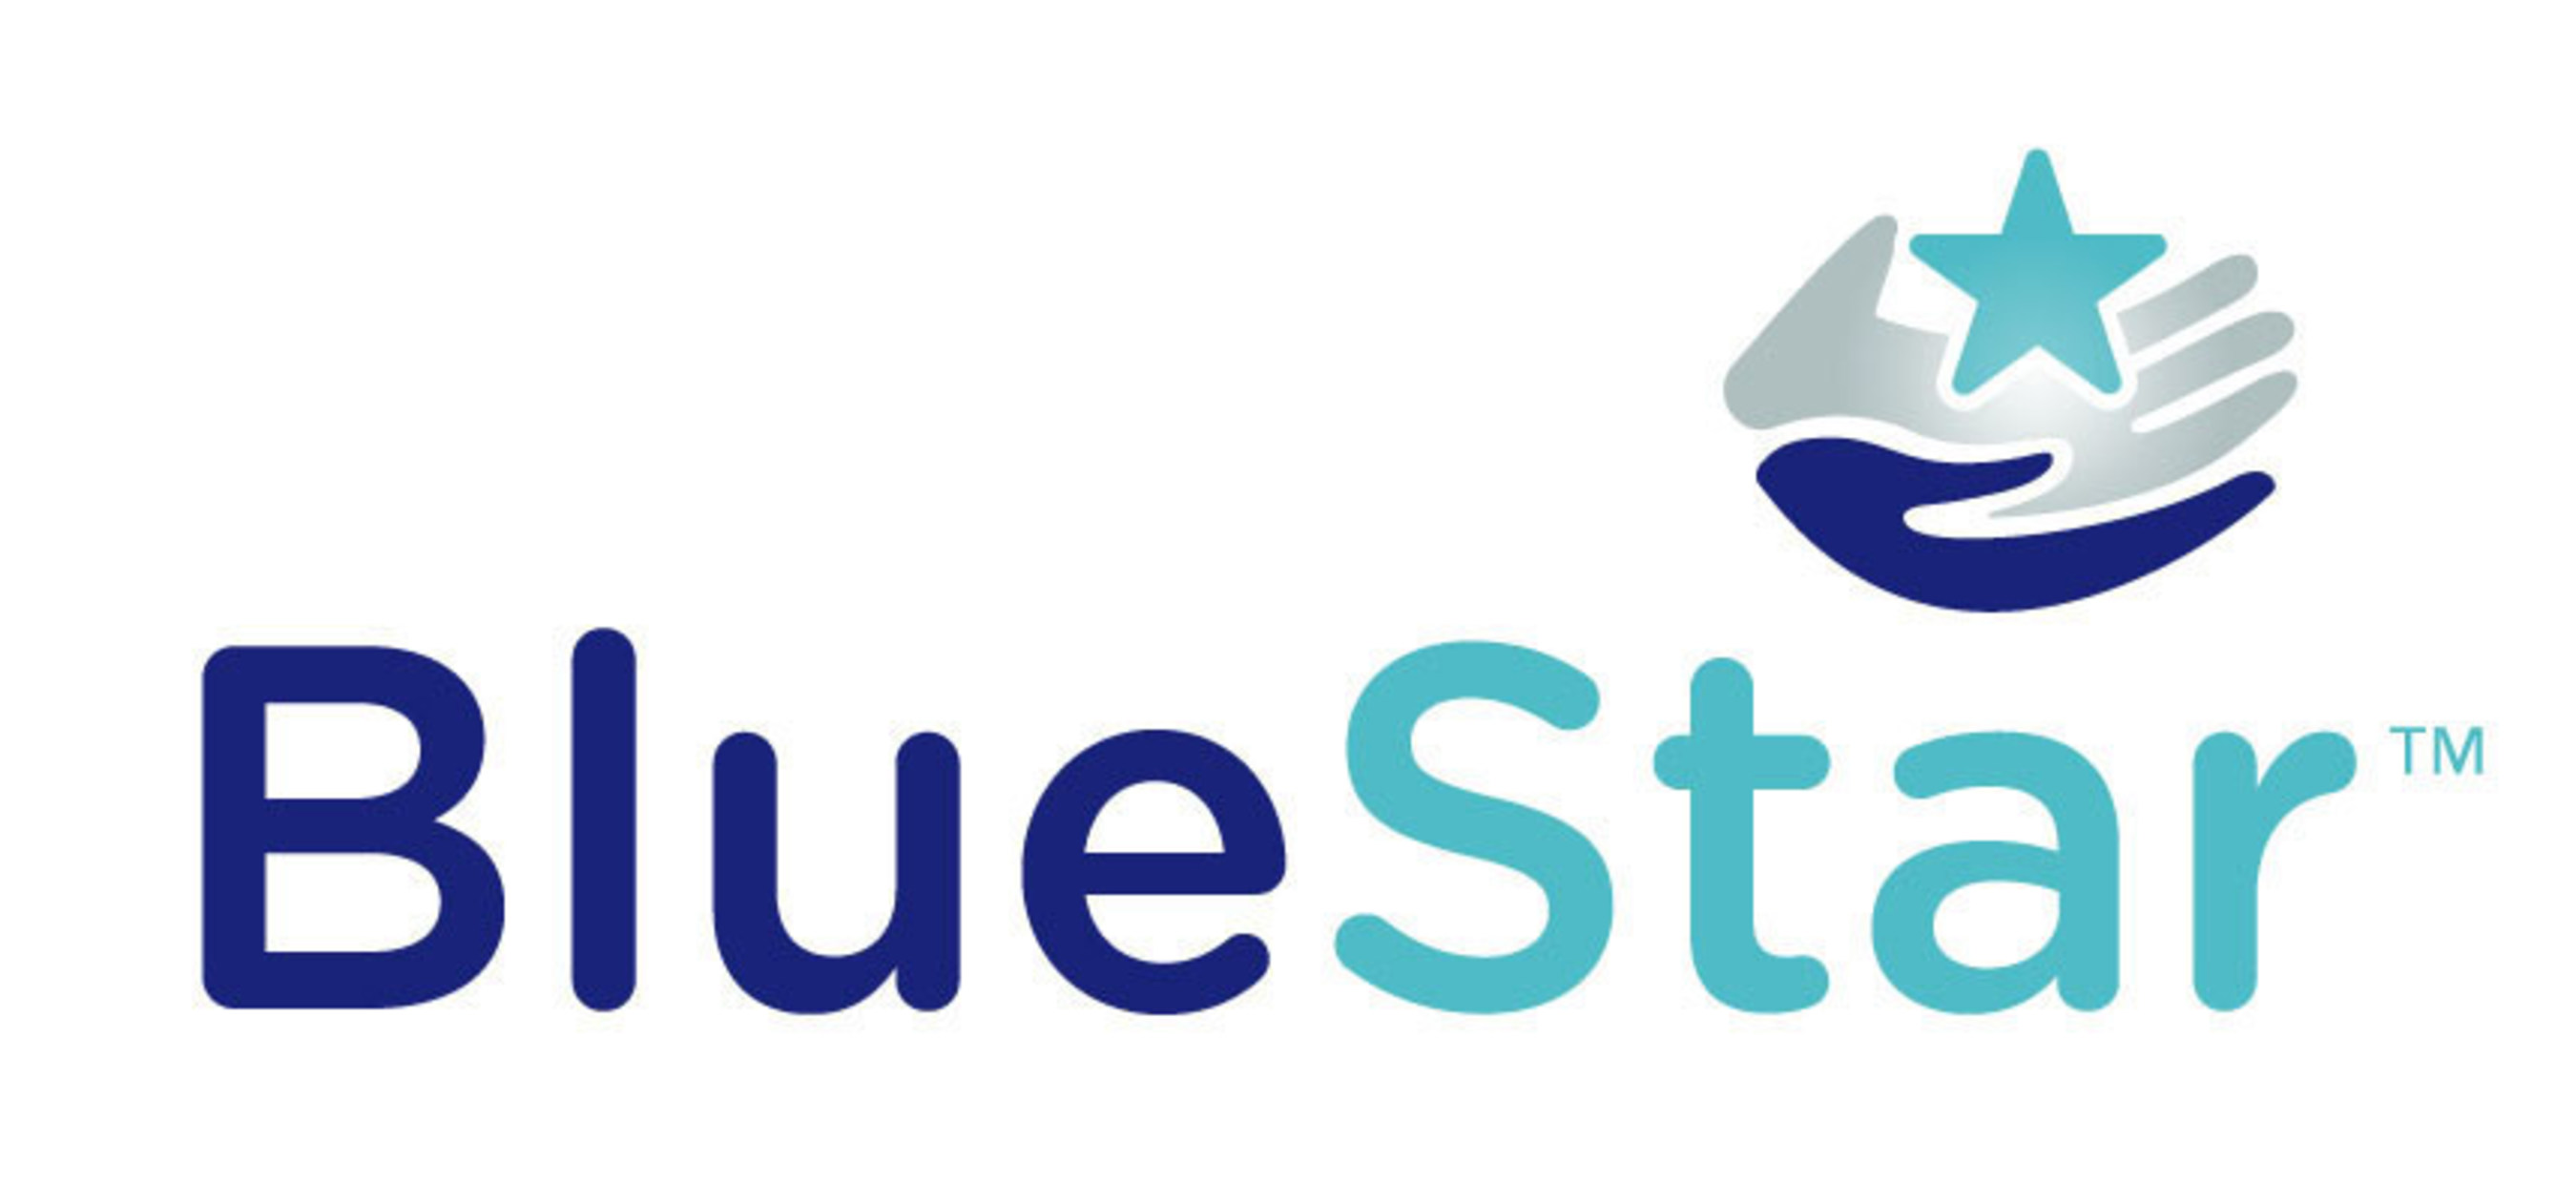 BlueStar adapts to you, with real-time guidance that fits your life.